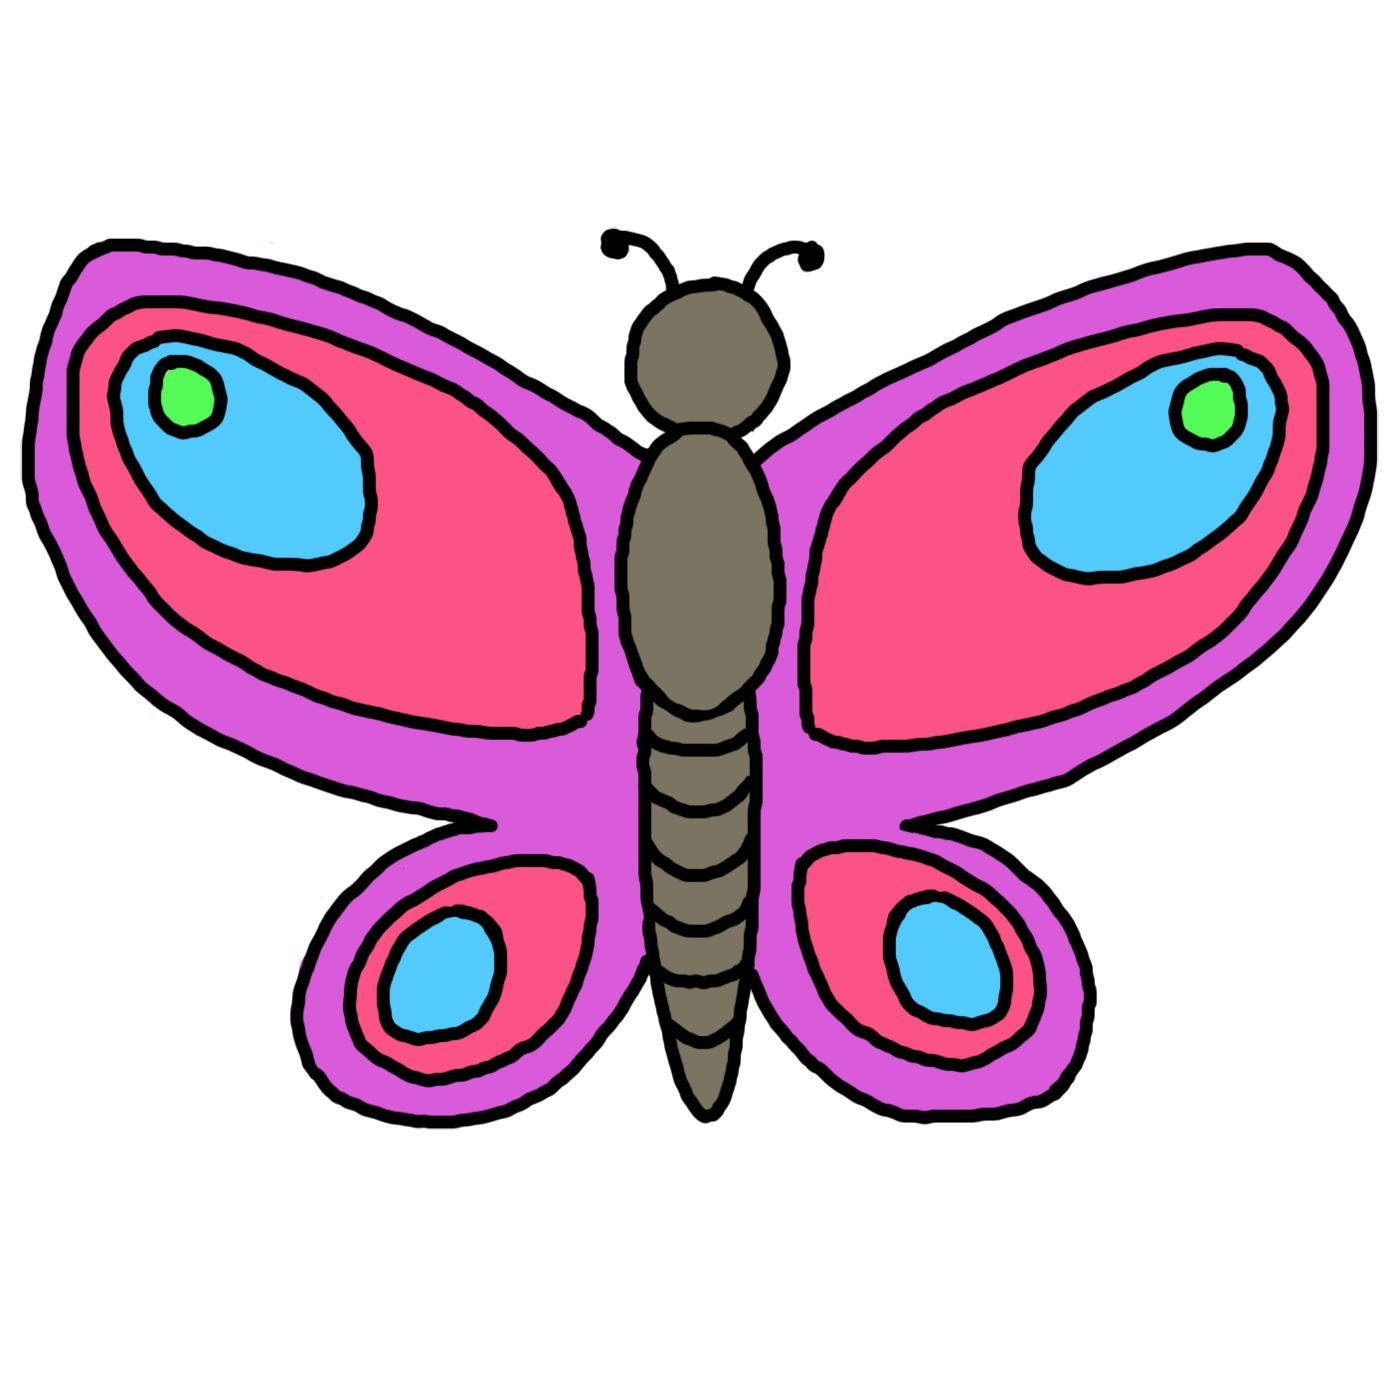 Simple Butterfly Clip Art Hd Pictures 4 HD Wallpapers | amagico.com